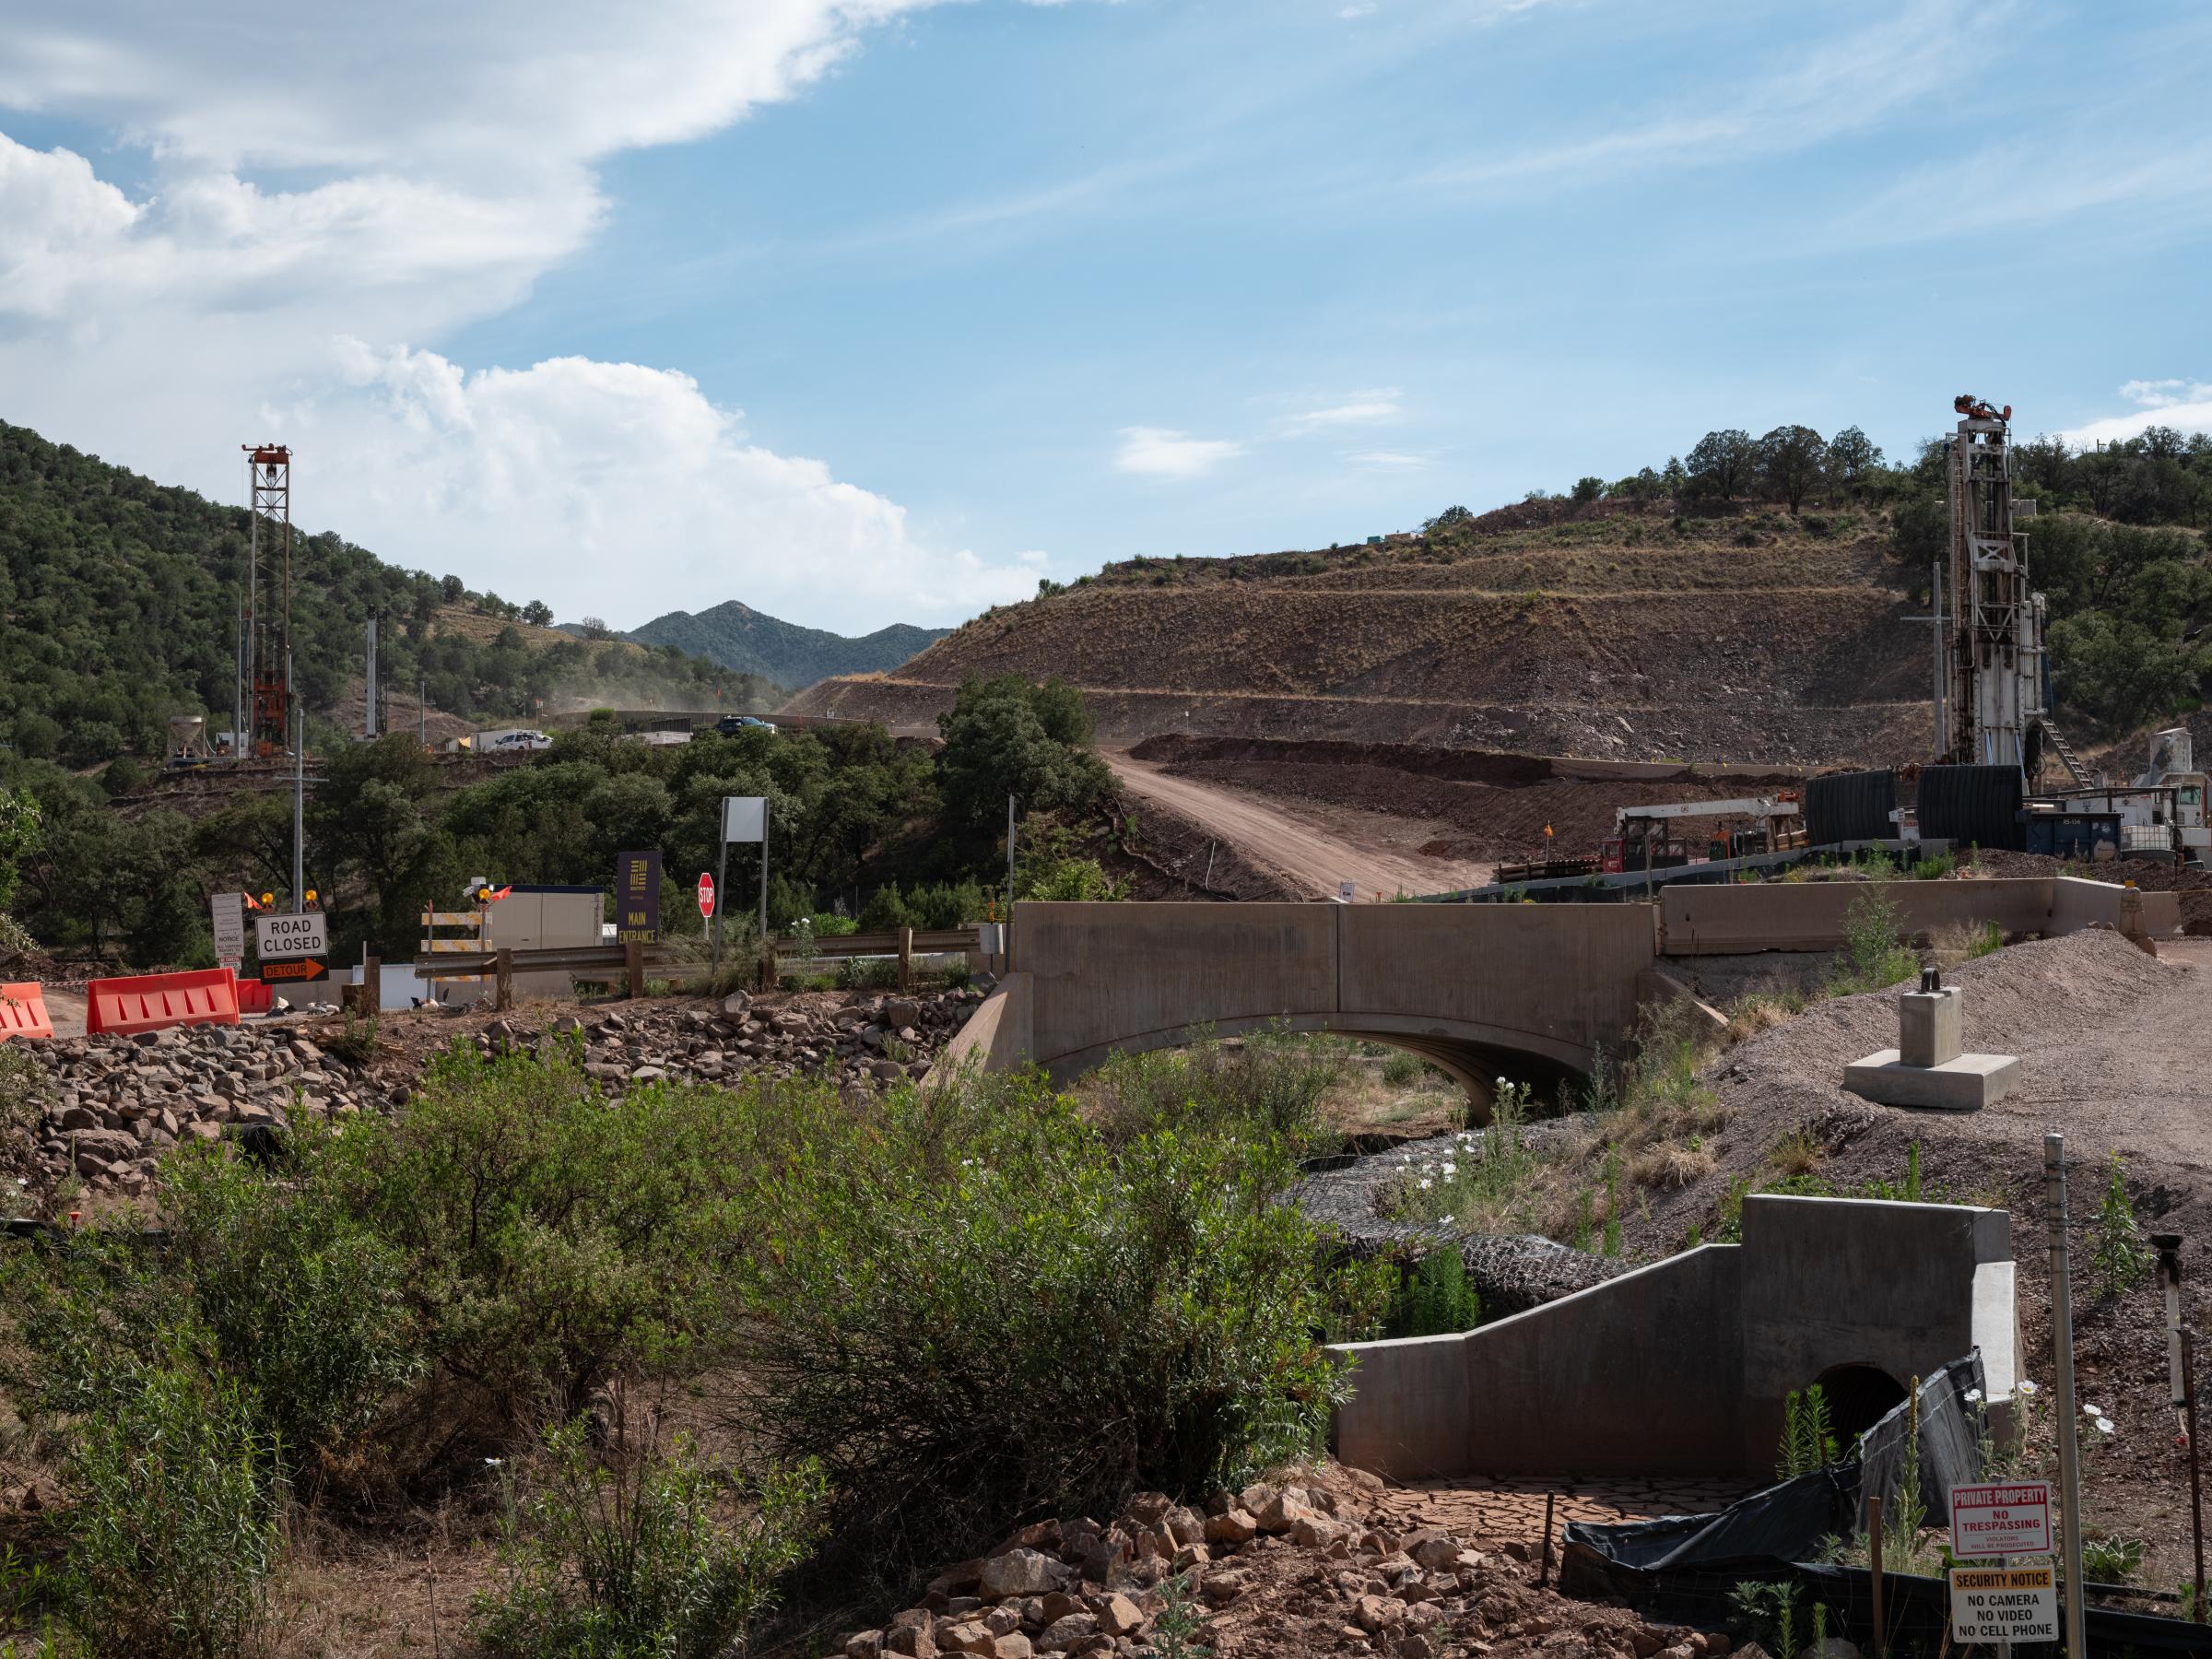 Saving the Patagonias - The Intercept - A dewatering and water treatment facility at South32...